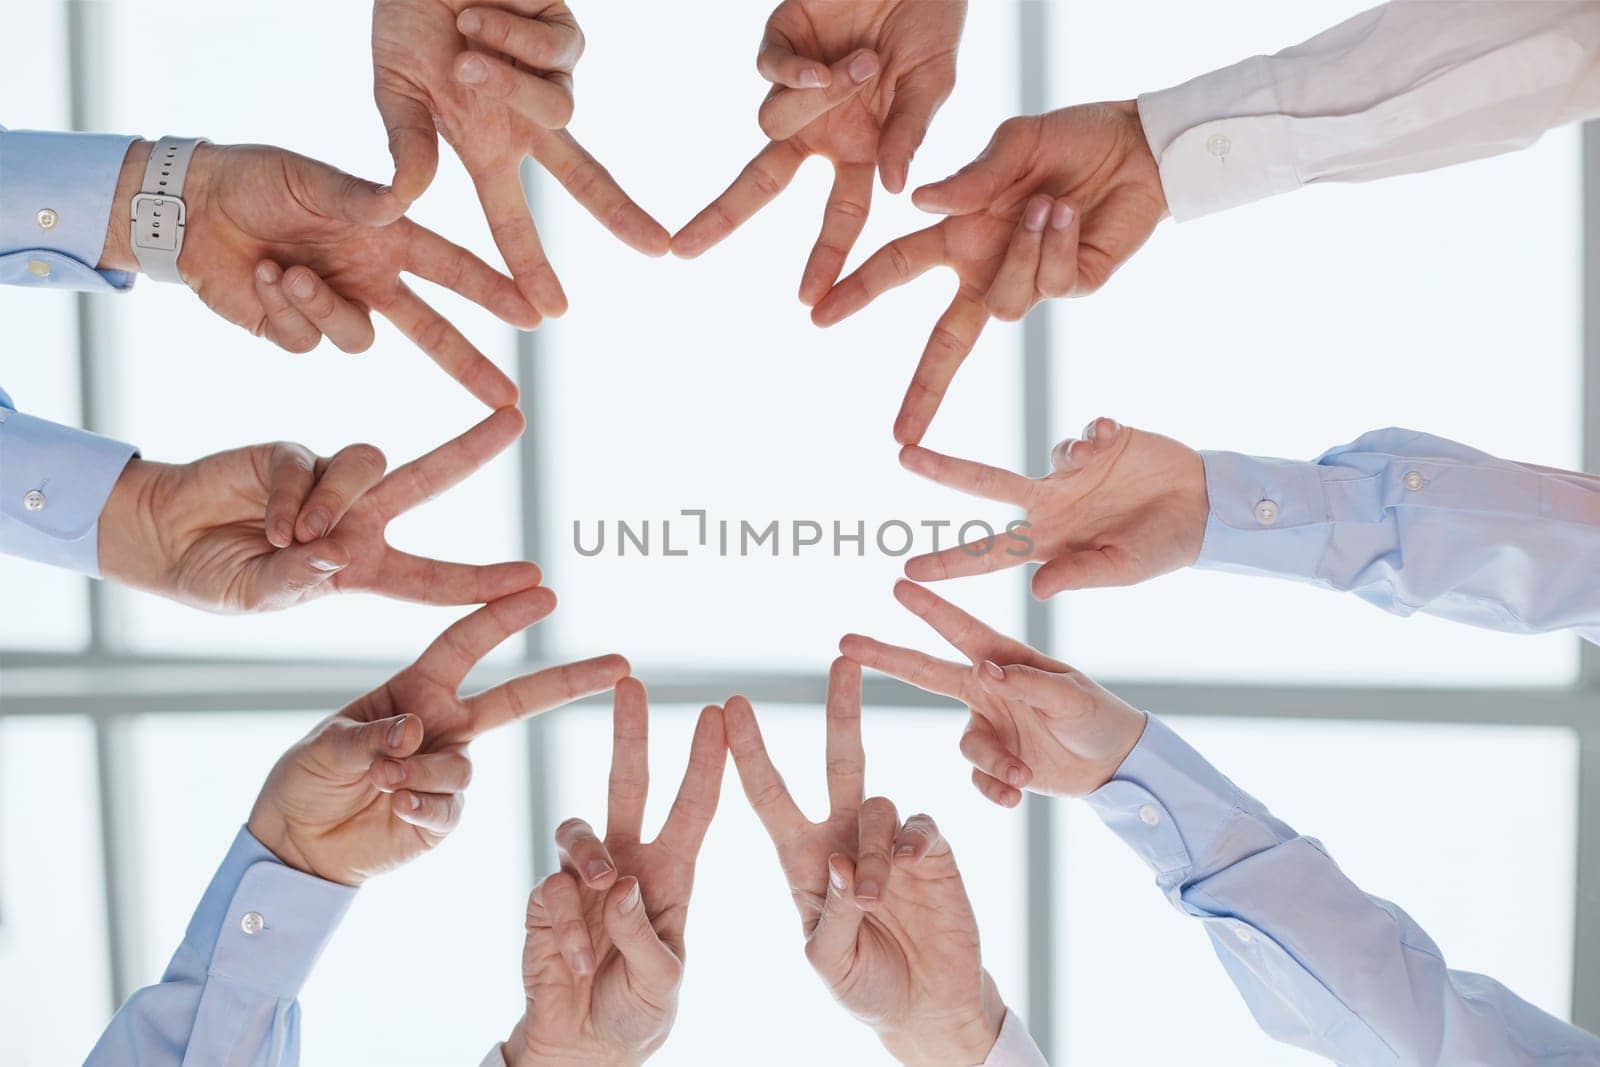 Meeting, about us and employee fingers together for solidarity, mission or creative work goal